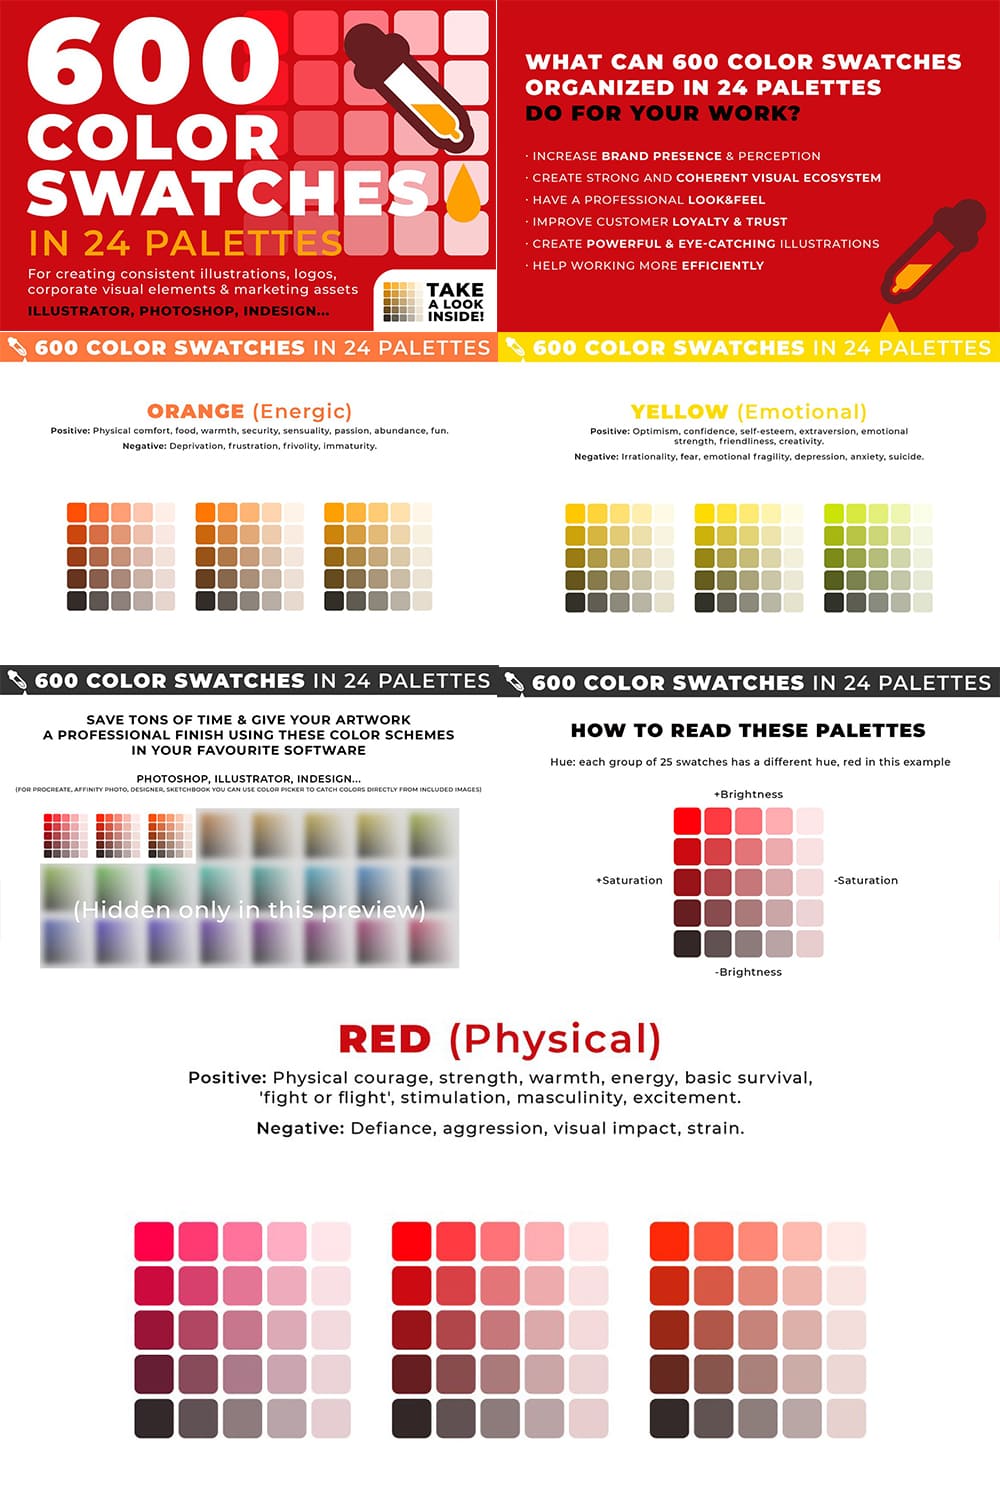 600 Color Swatches In 24 Palettes - "How To Read These Palettes".